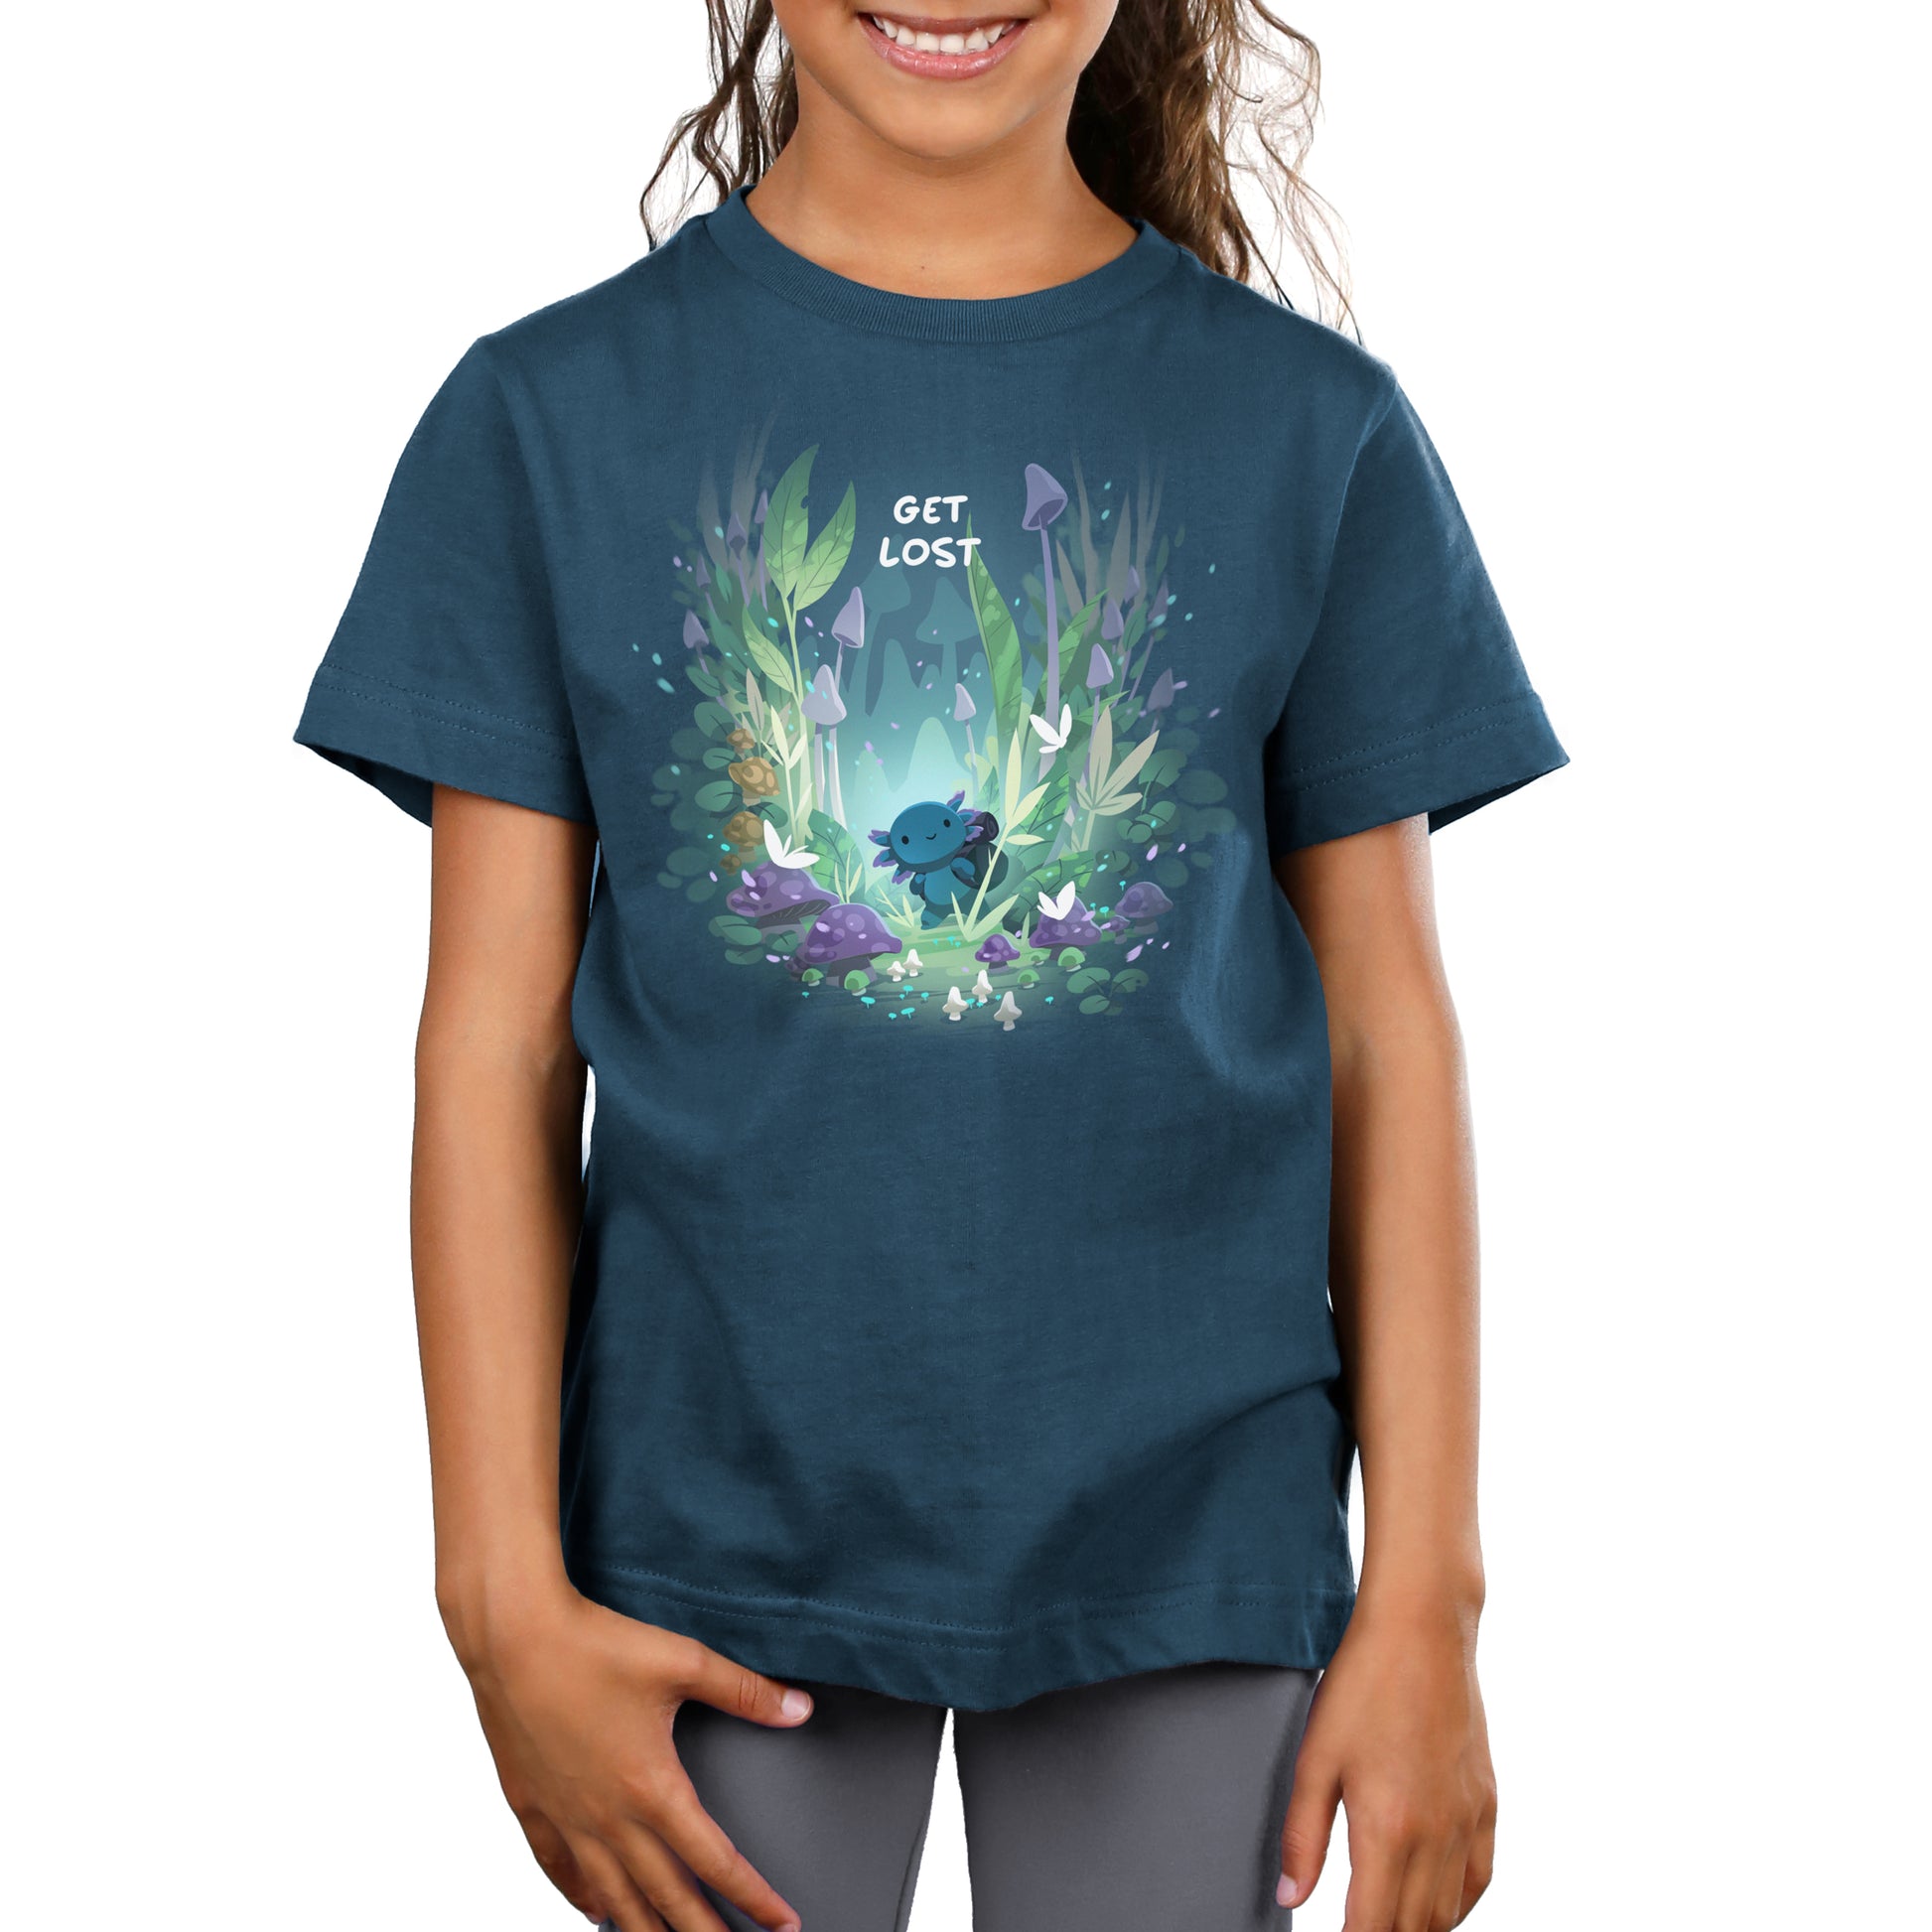 Young girl smiling, wearing a MonsterDigital Axolotl Explorer t-shirt with a whimsical forest design and the phrase "get lost" printed on it.